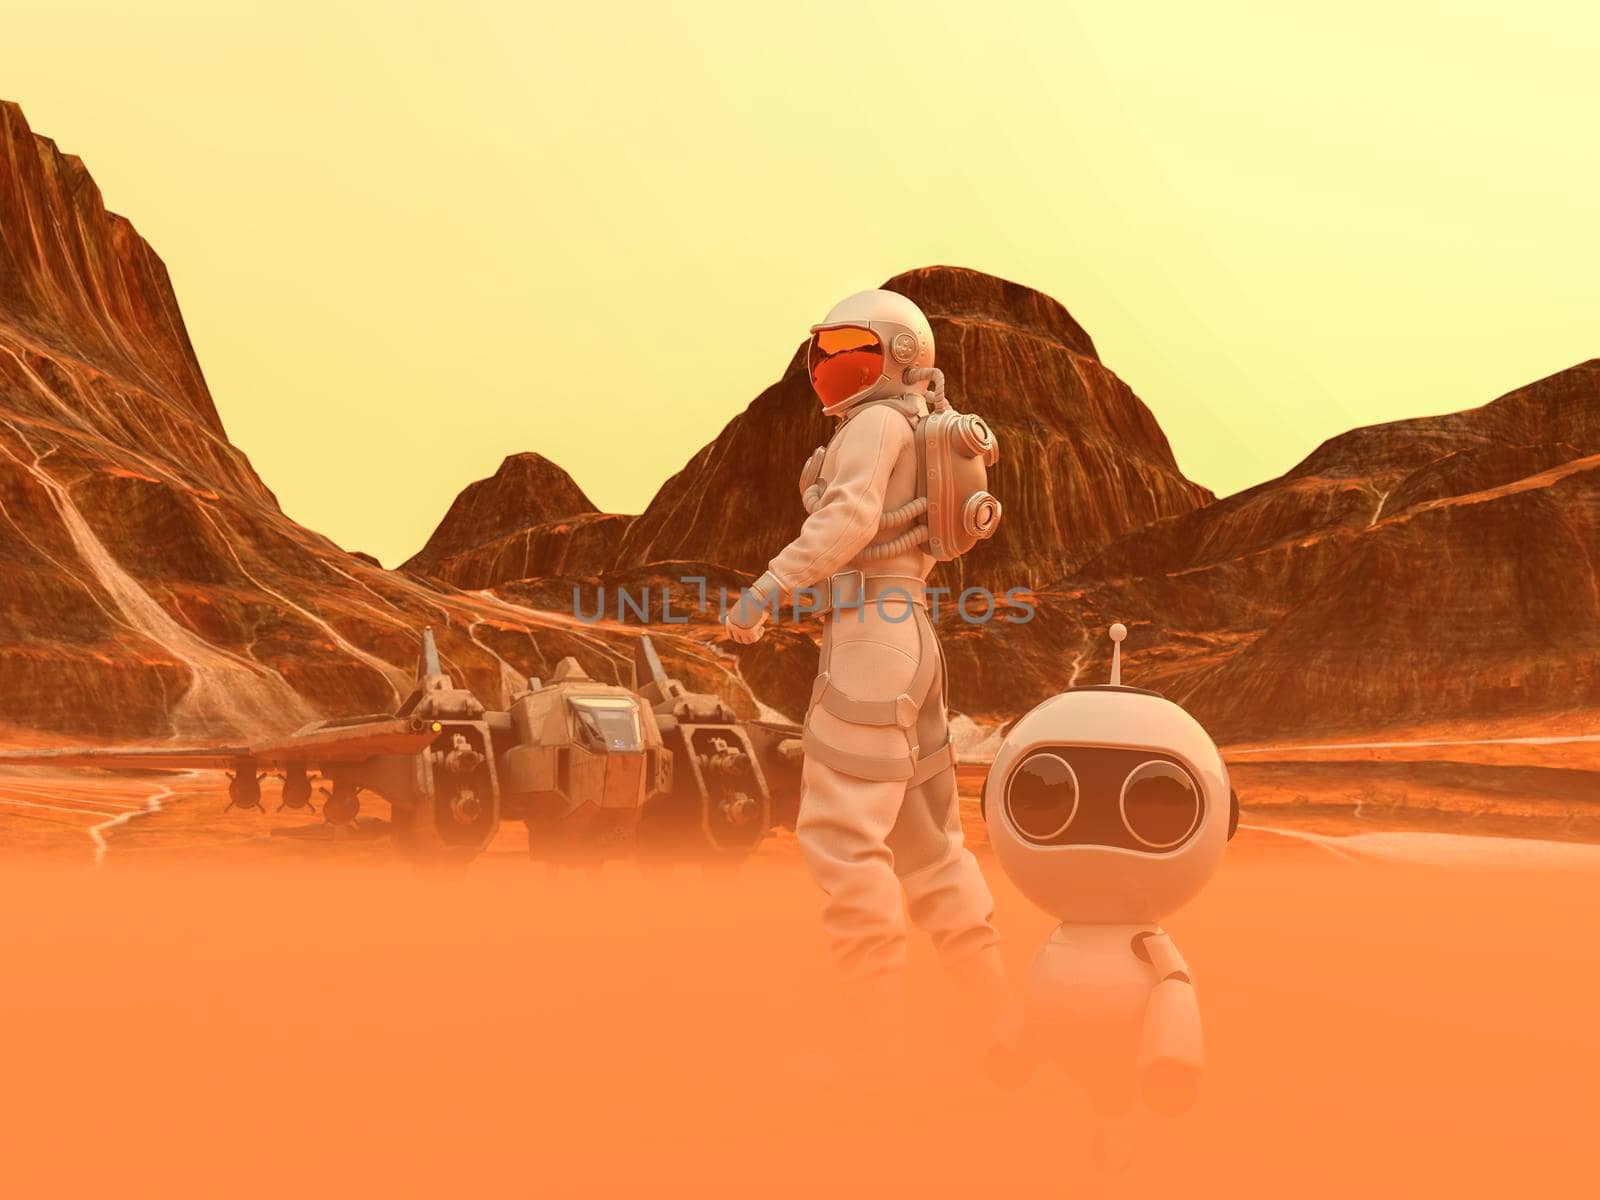 Astronaut and small robot at the spacewalk on a desert planet with spaceship at the back by ankarb